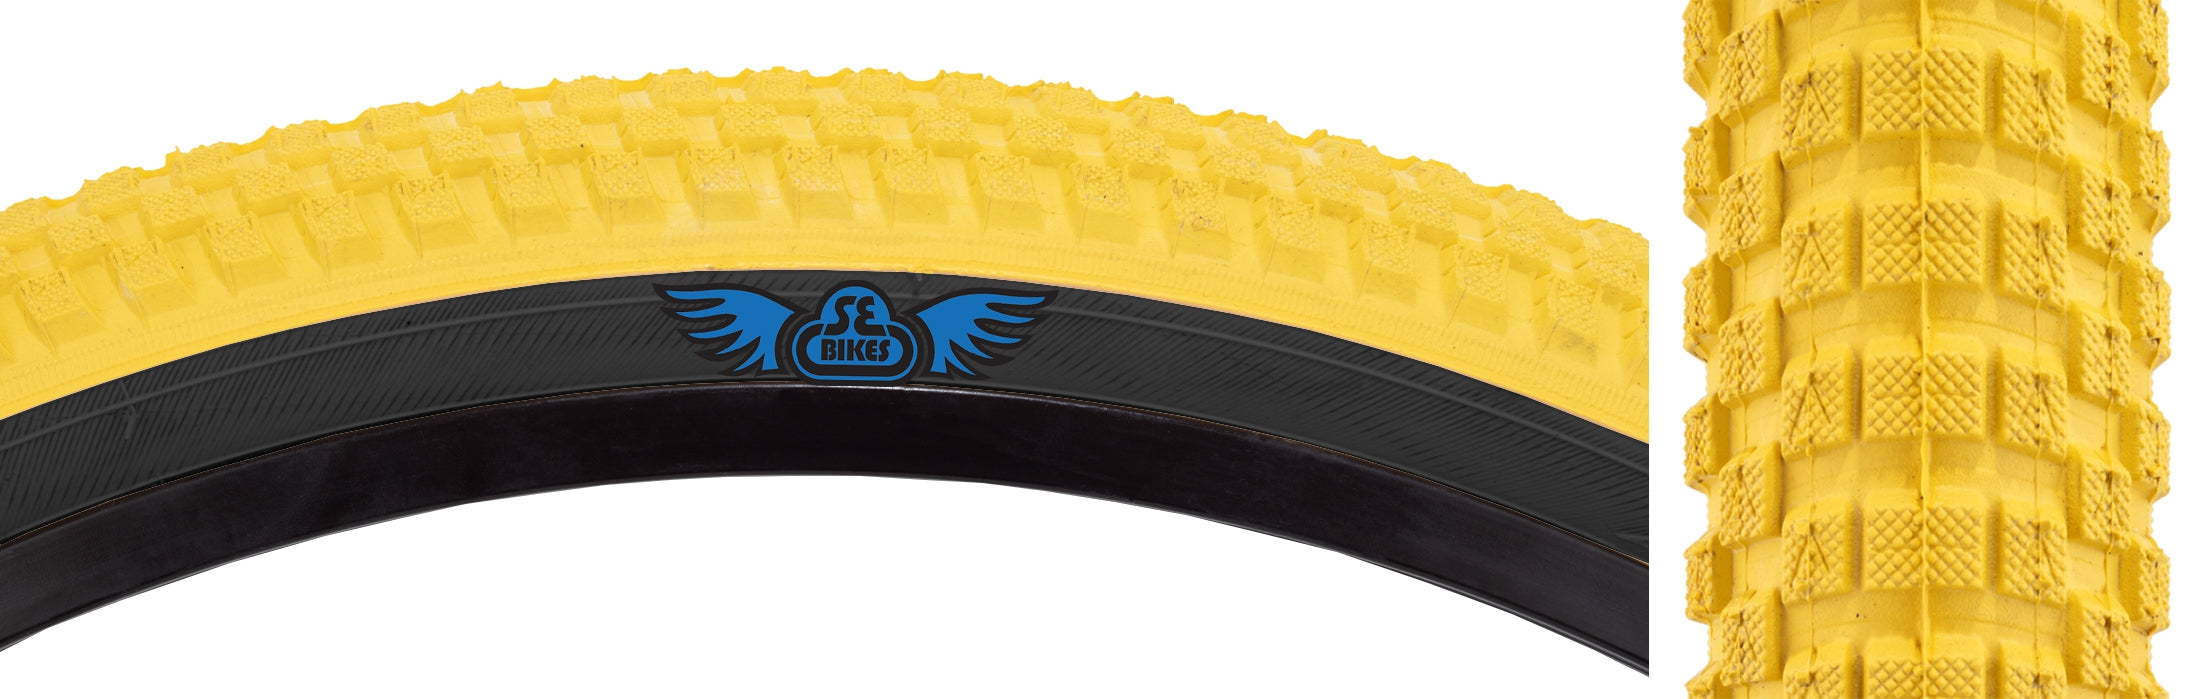 side view of cub tire in yellow